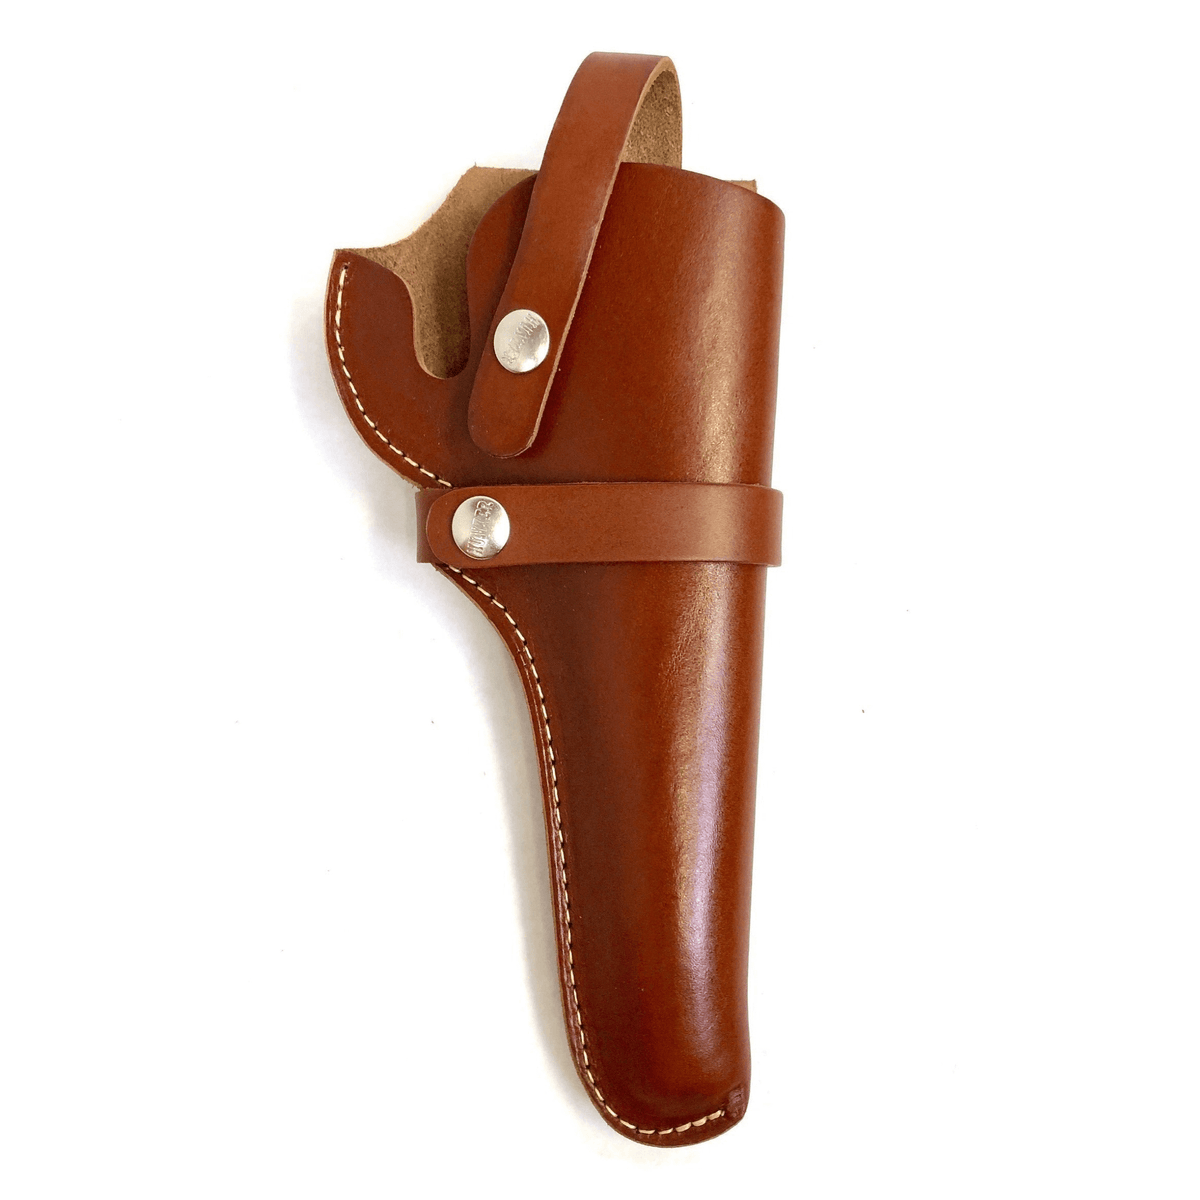 Leather Holster Kits, Leather Holster & Sheath Making Kits